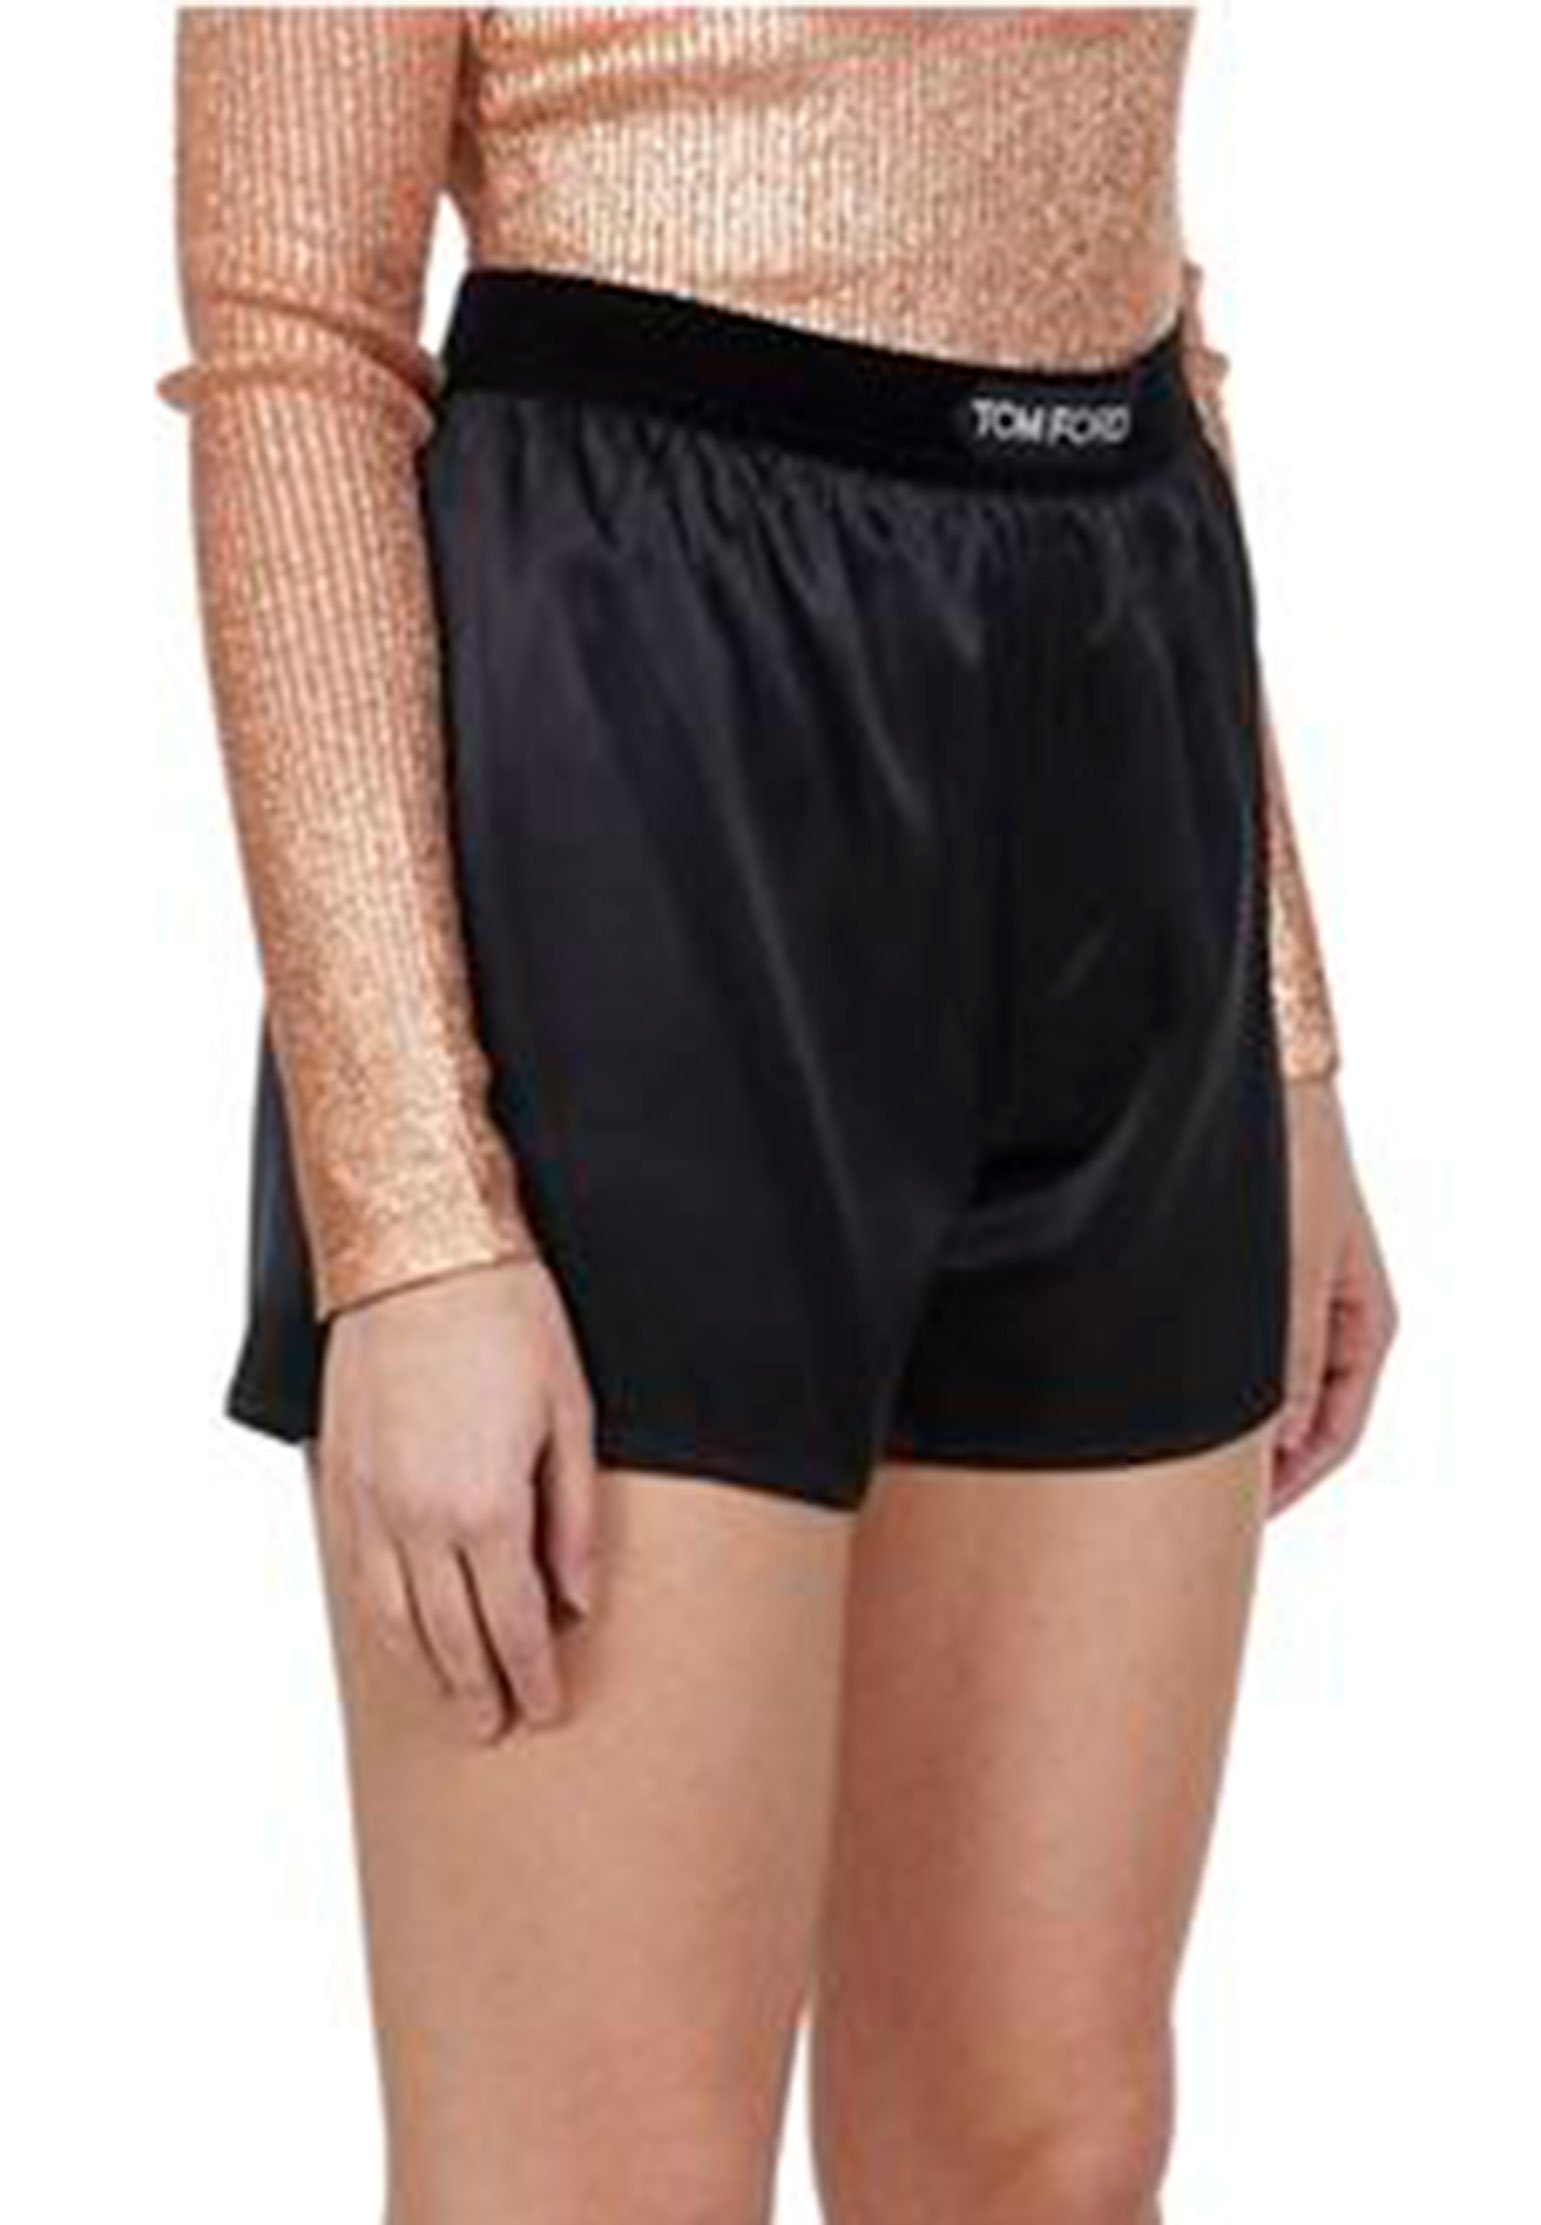 Shorts TOM FORD Color: black (Code: 1069) in online store Allure